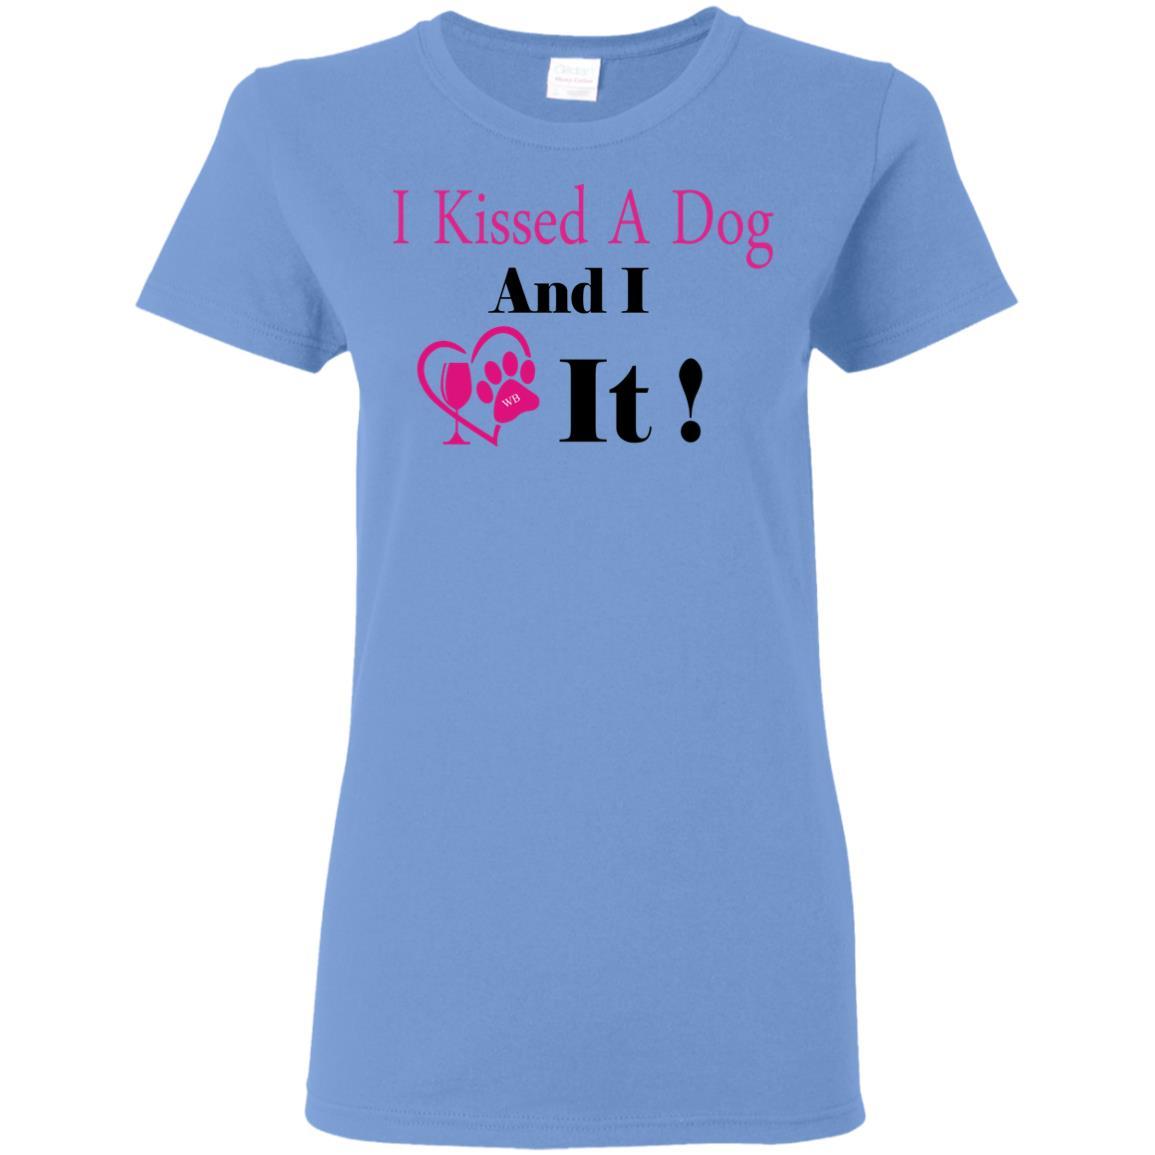 T-Shirts Carolina Blue / S WineyBitches.co "I Kissed A Dog And I Loved It:" Ladies' 5.3 oz. T-Shirt WineyBitchesCo